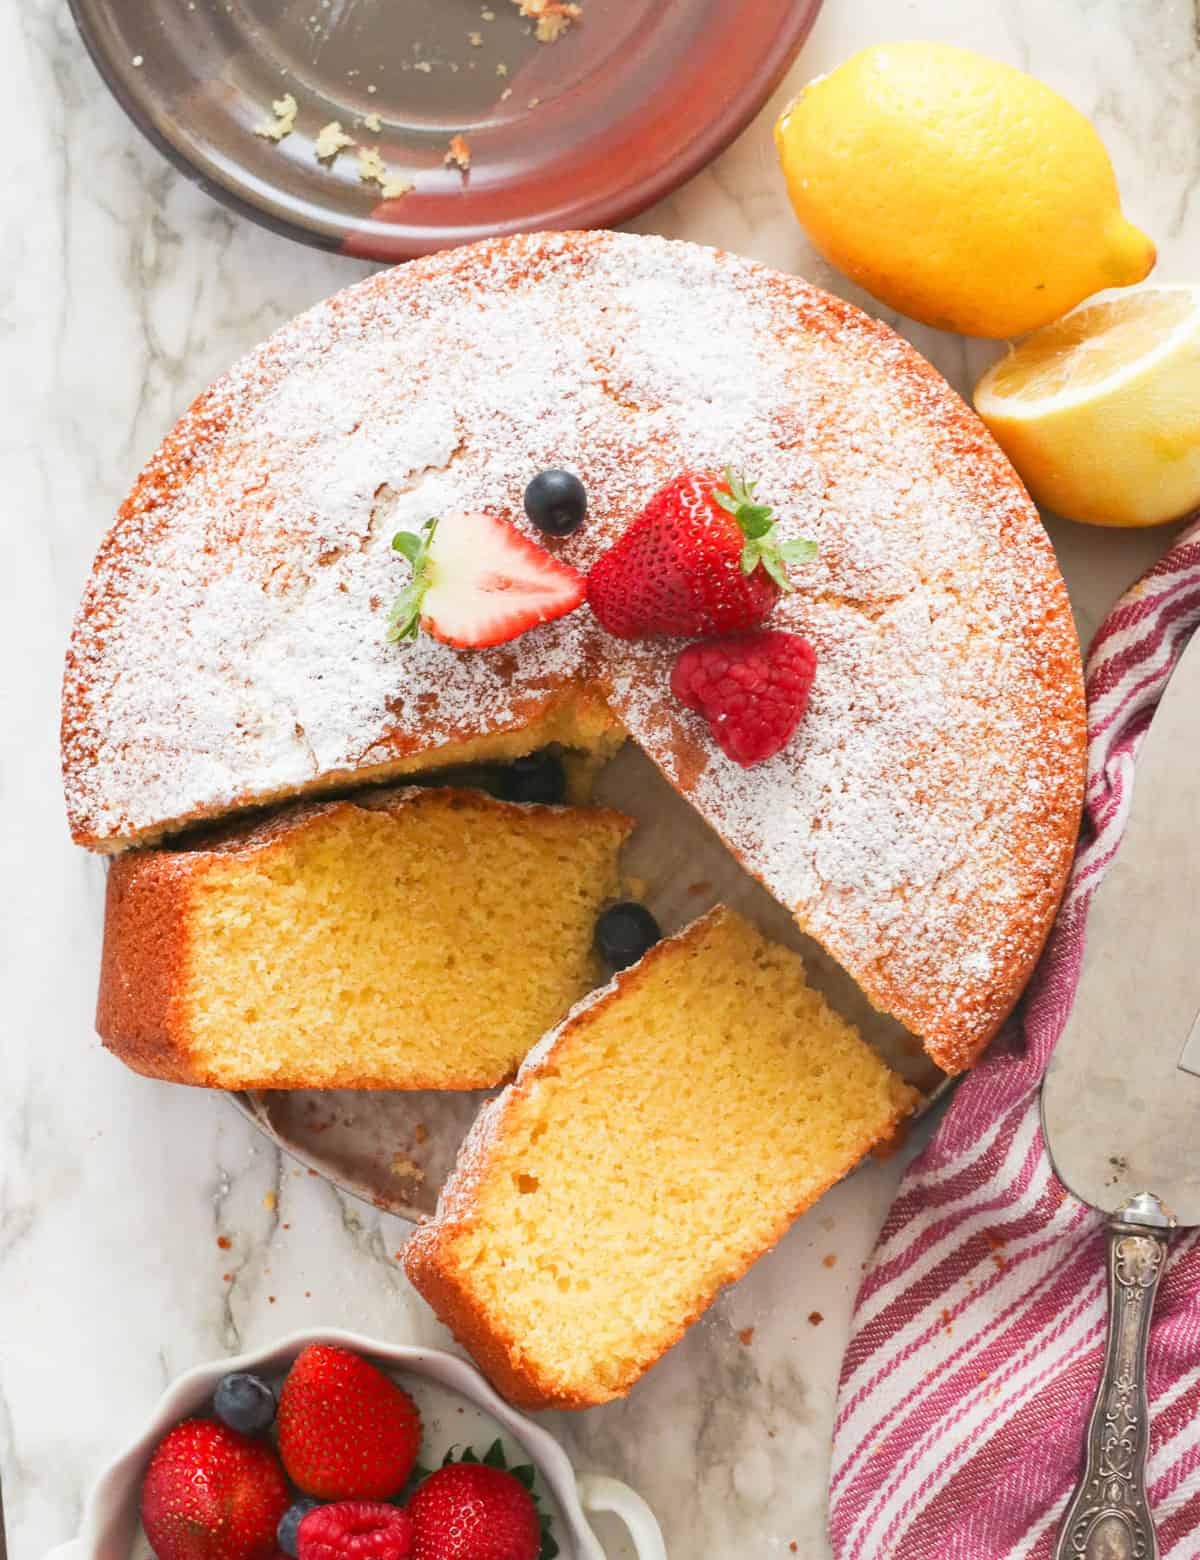 Slicing an lemony olive oil cake and serving with fruit